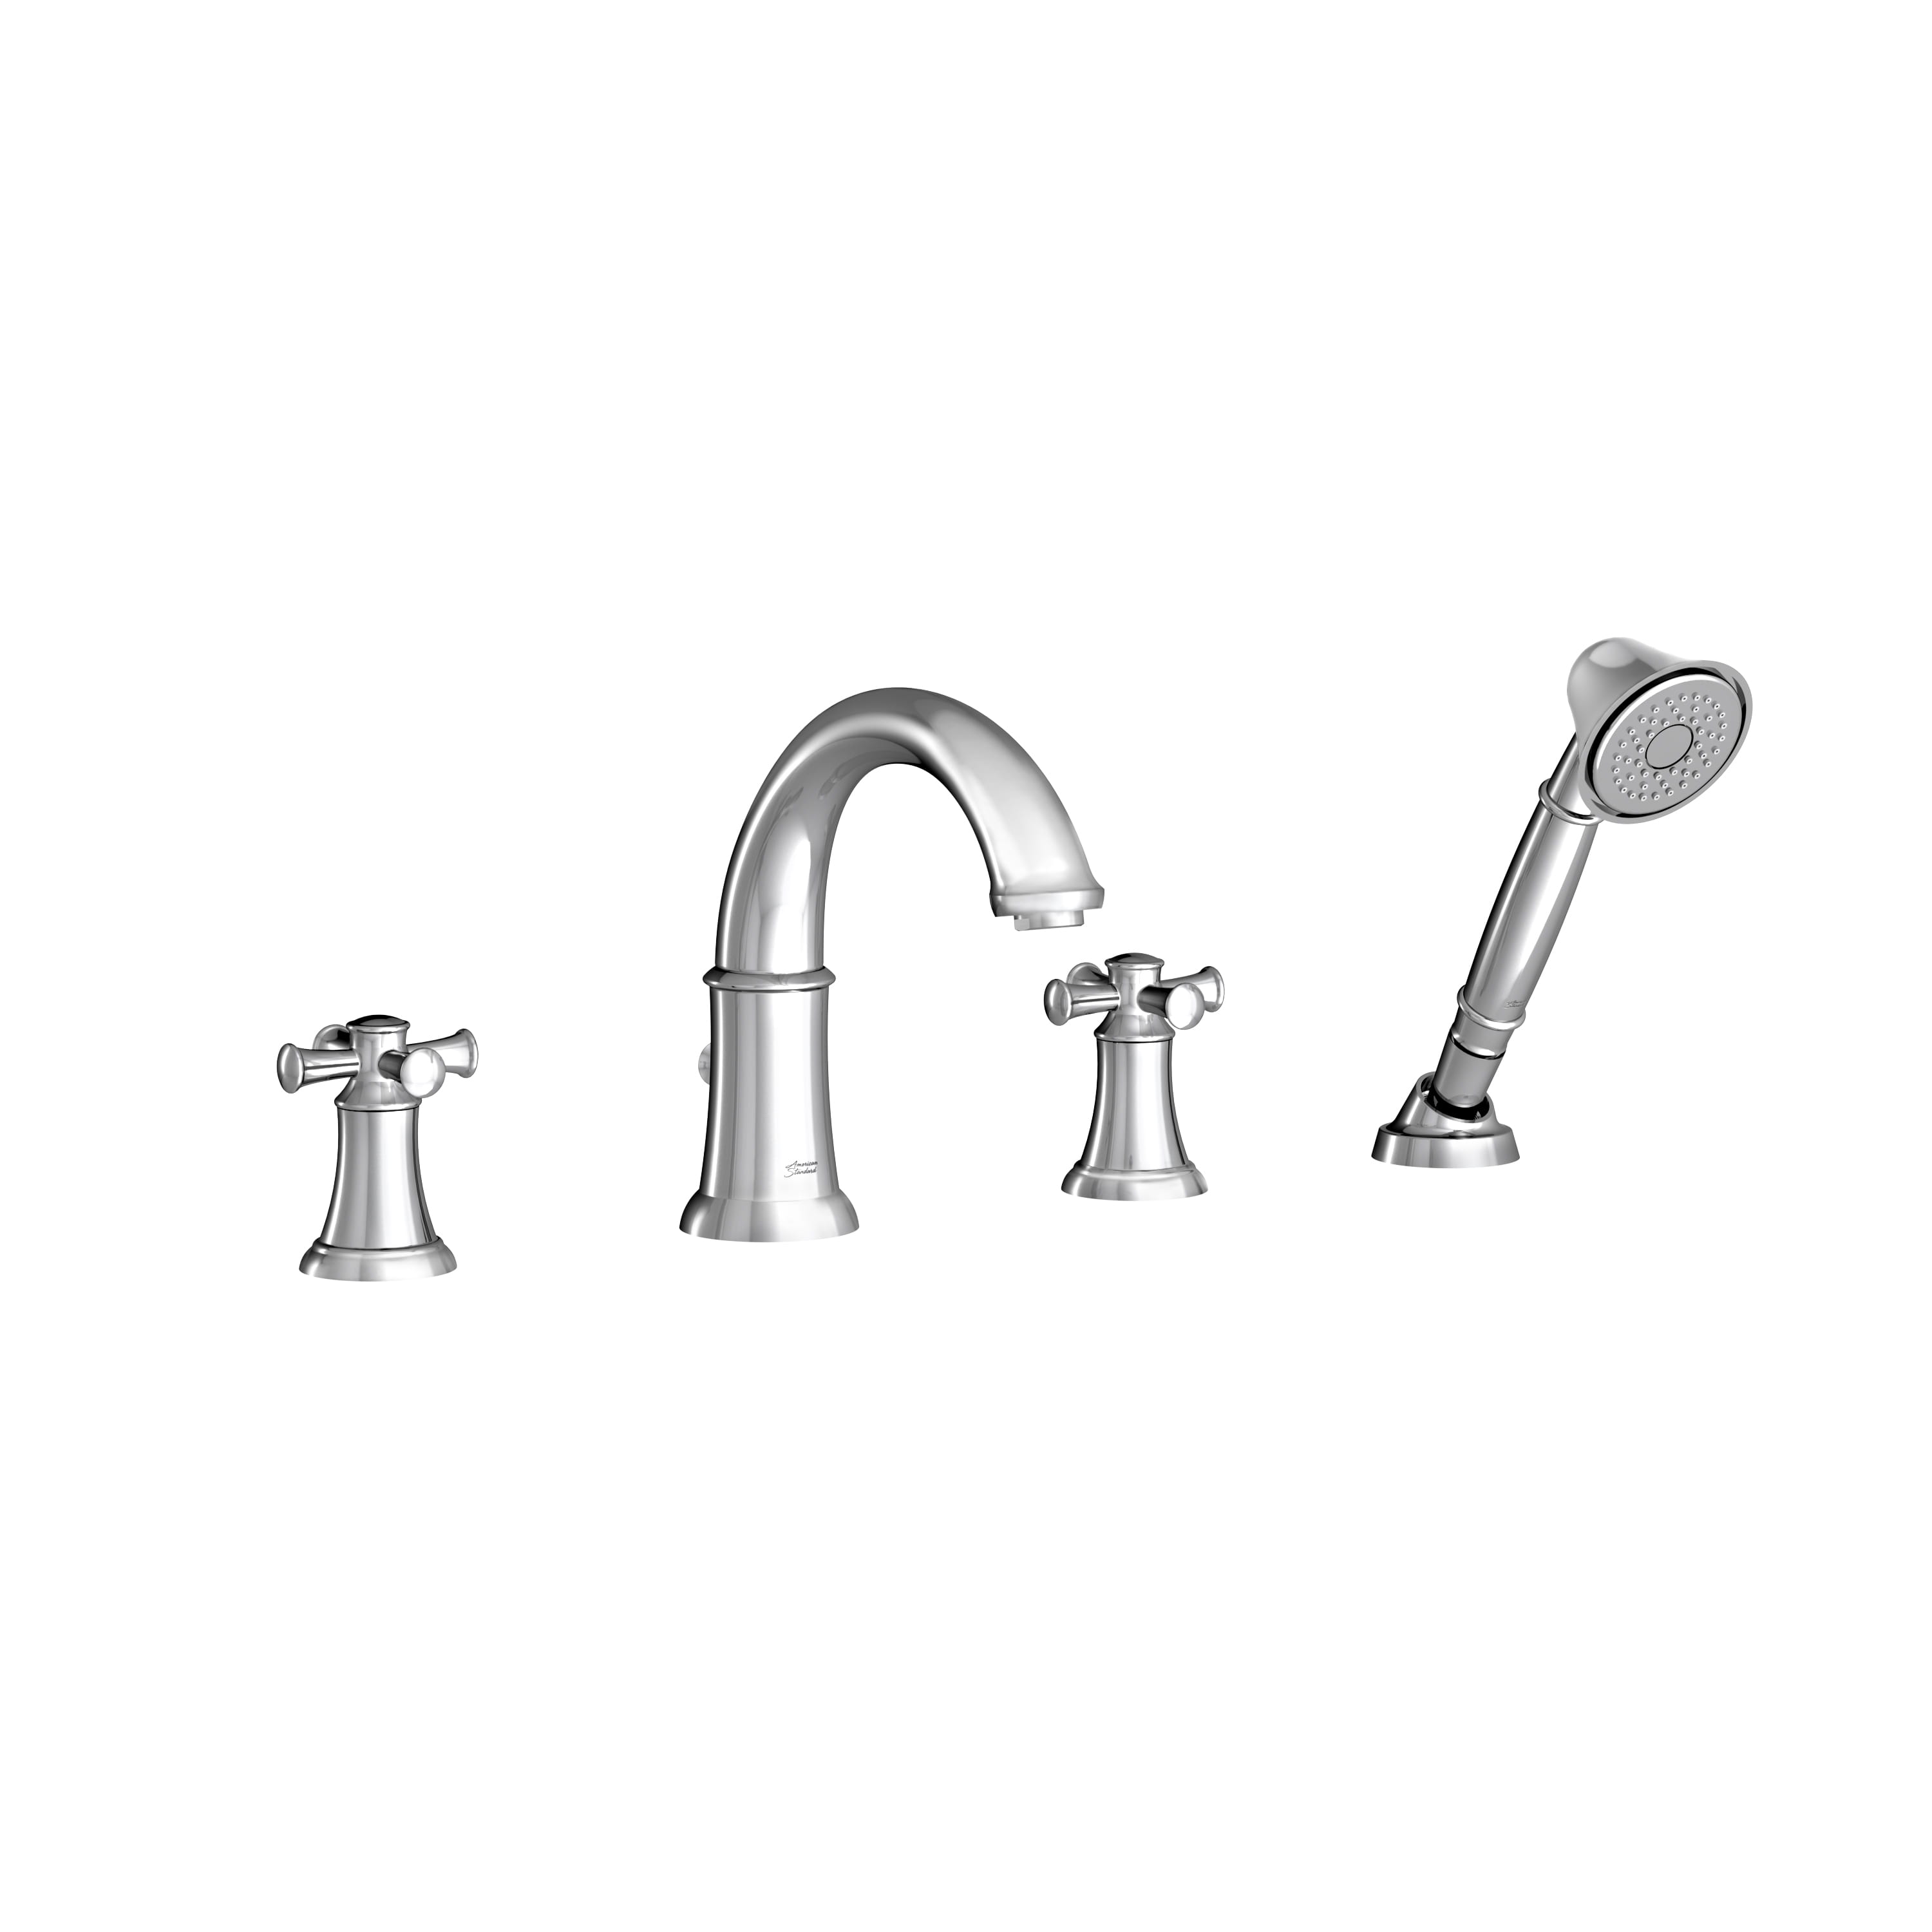 Portsmouth Bathtub Faucet with Personal Shower for Flash Rough in Valve with Cross Handles CHROME